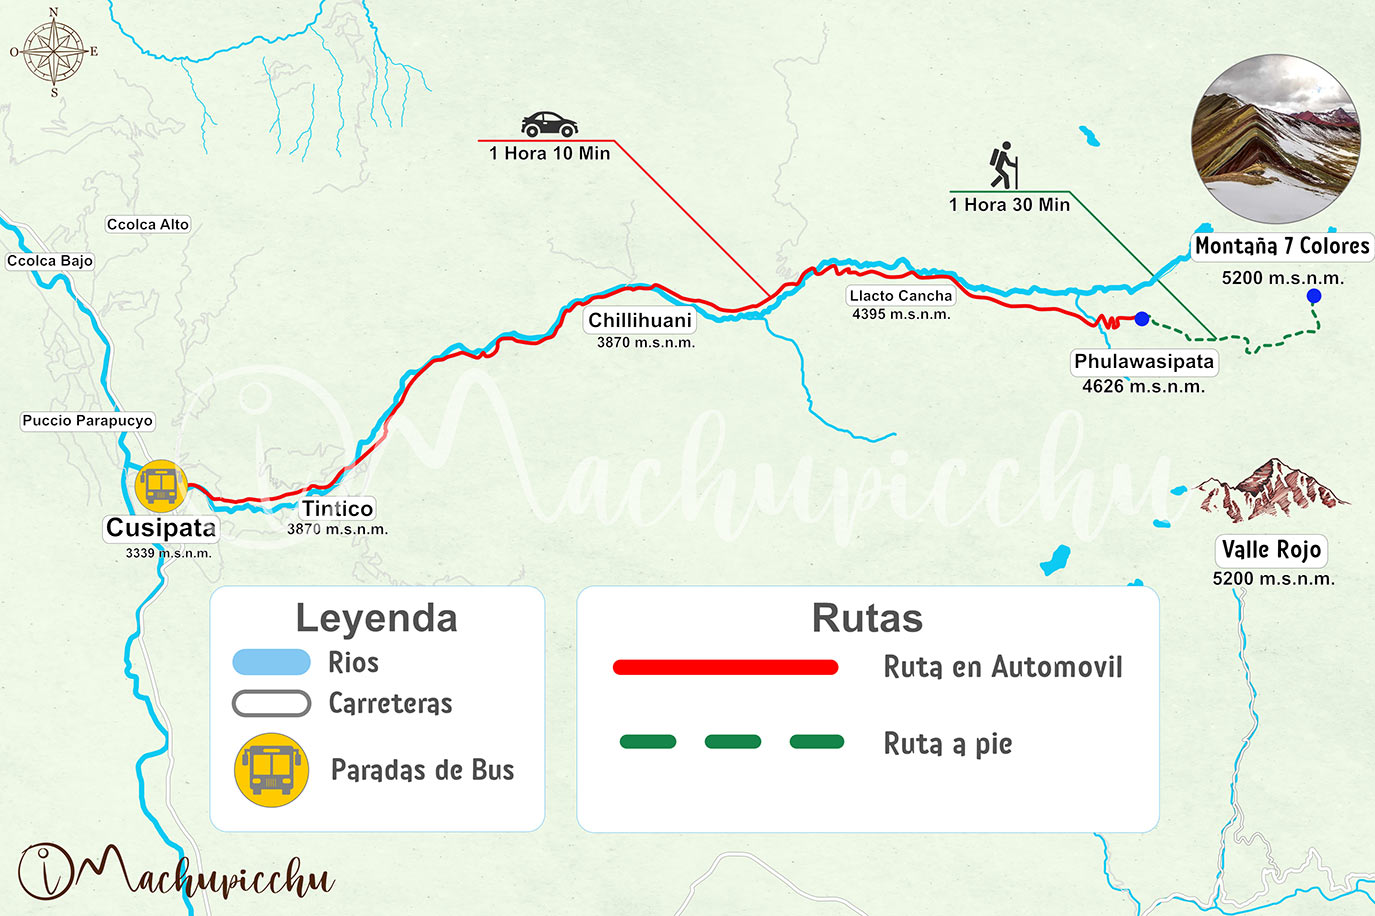 Mountain 7 Colors route map